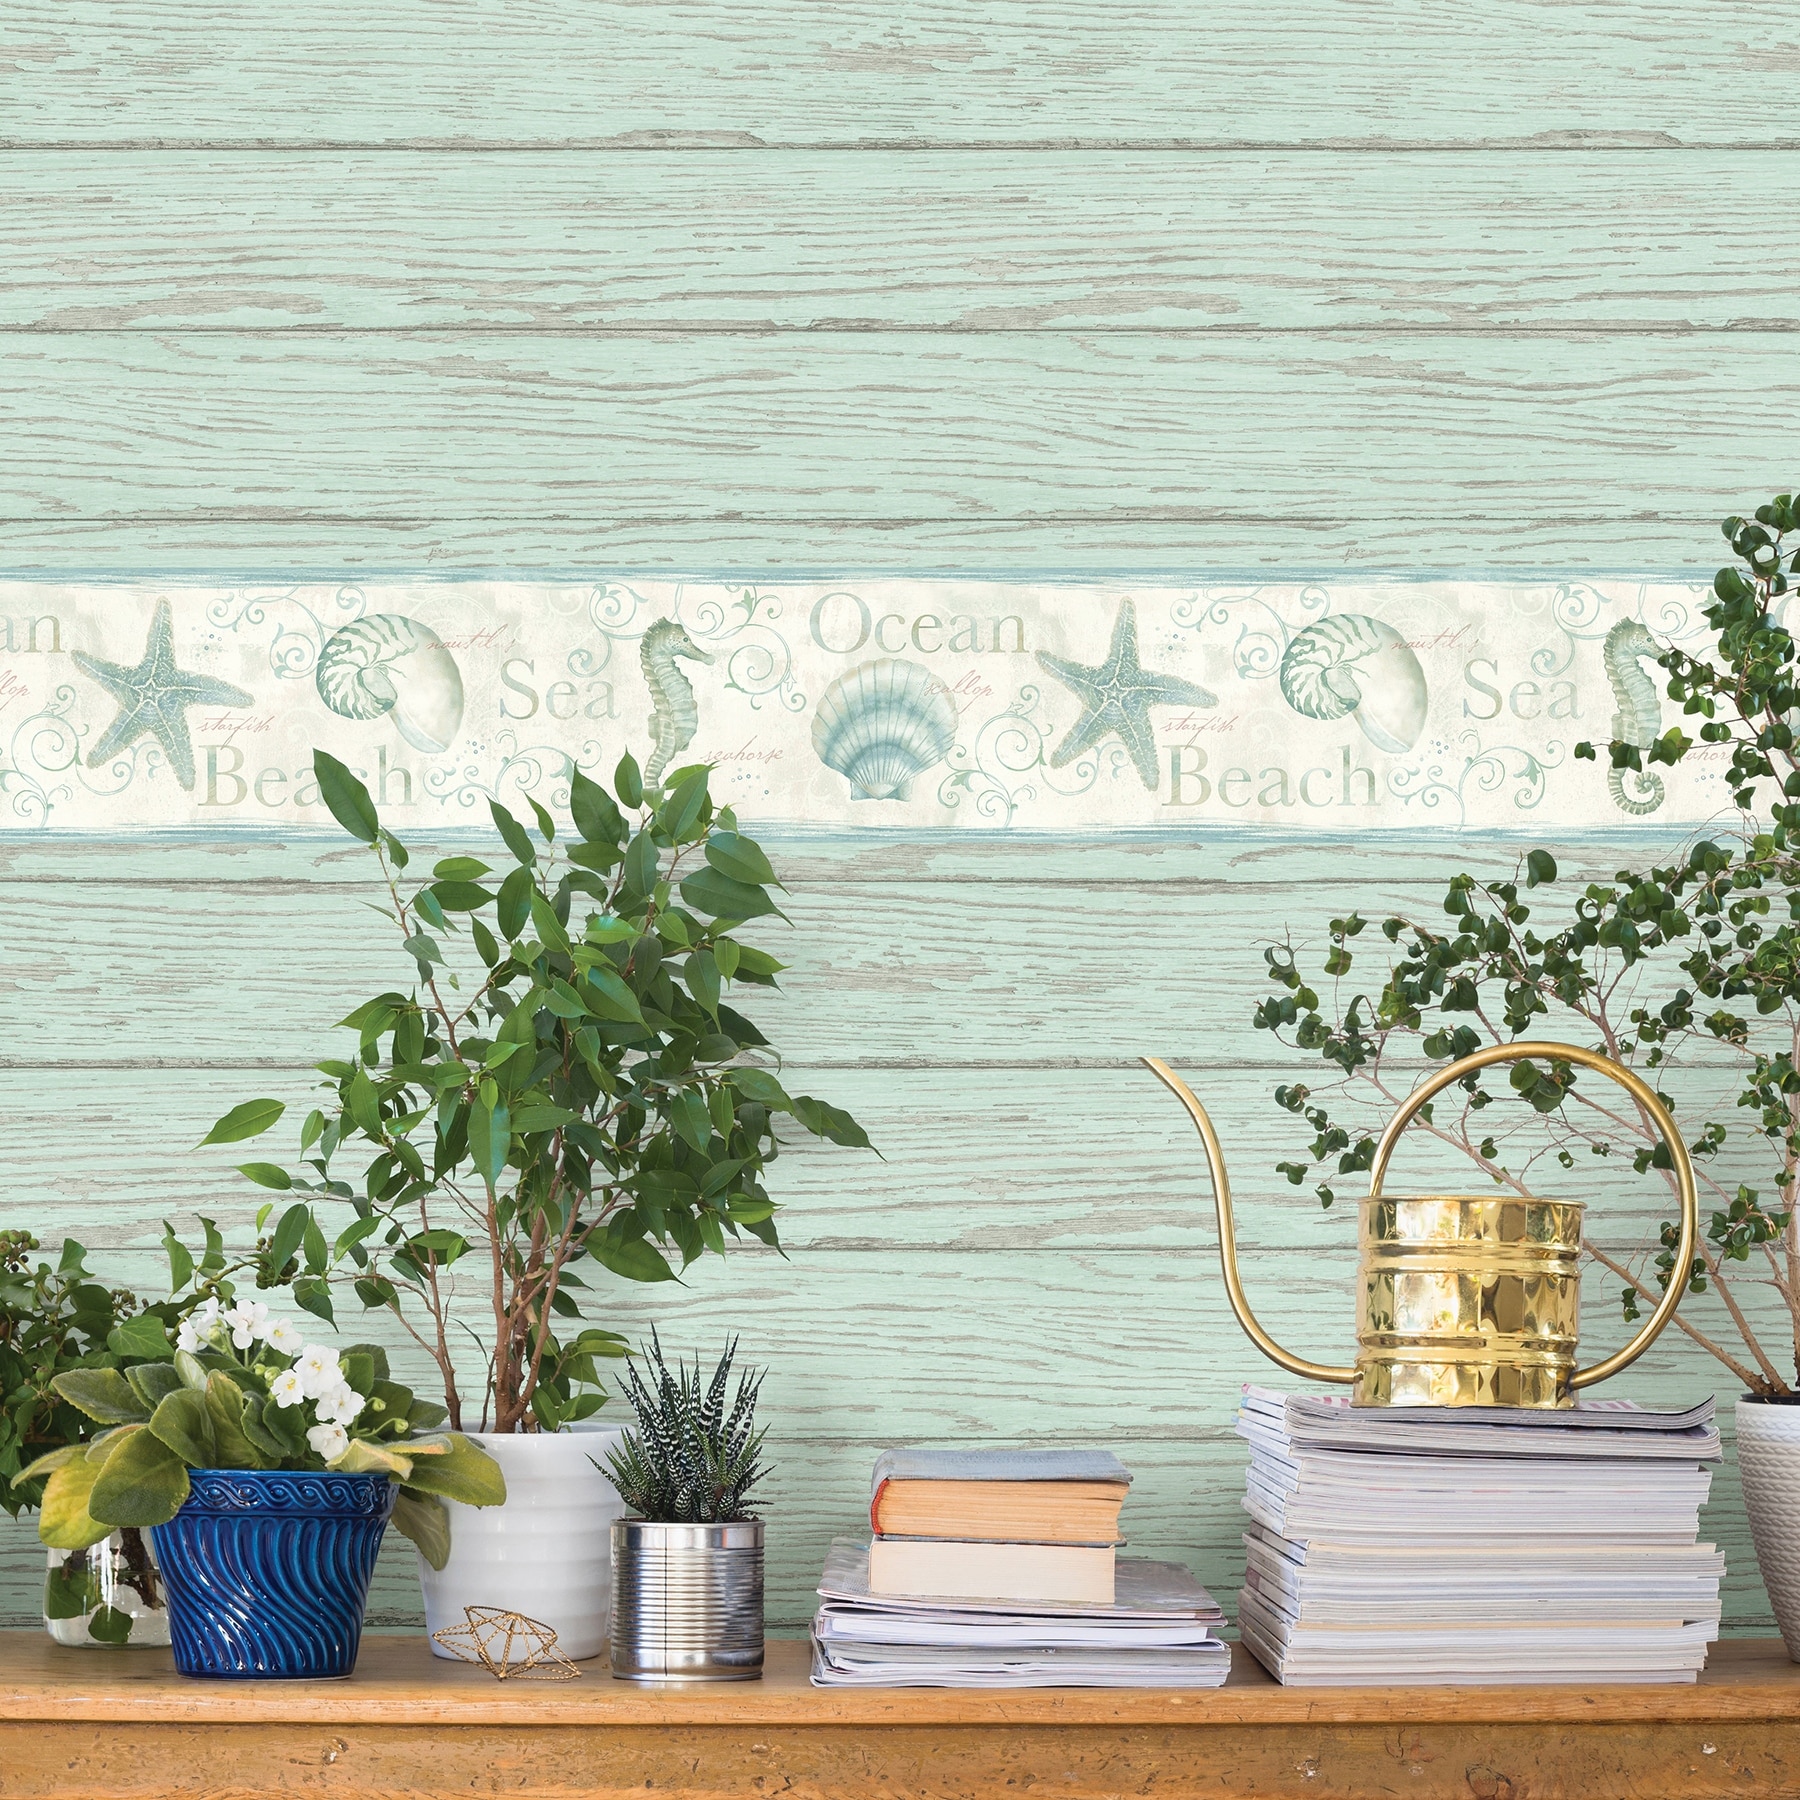 https://ak1.ostkcdn.com/images/products/is/images/direct/c797f2a11b407c89003f453cf752bc5691a98dc3/Malone%2C-Rehoboth-Aqua-Distressed-Wood%2C-33%27-L-X-20.5-W%2C-Wallpaper-Roll.jpg